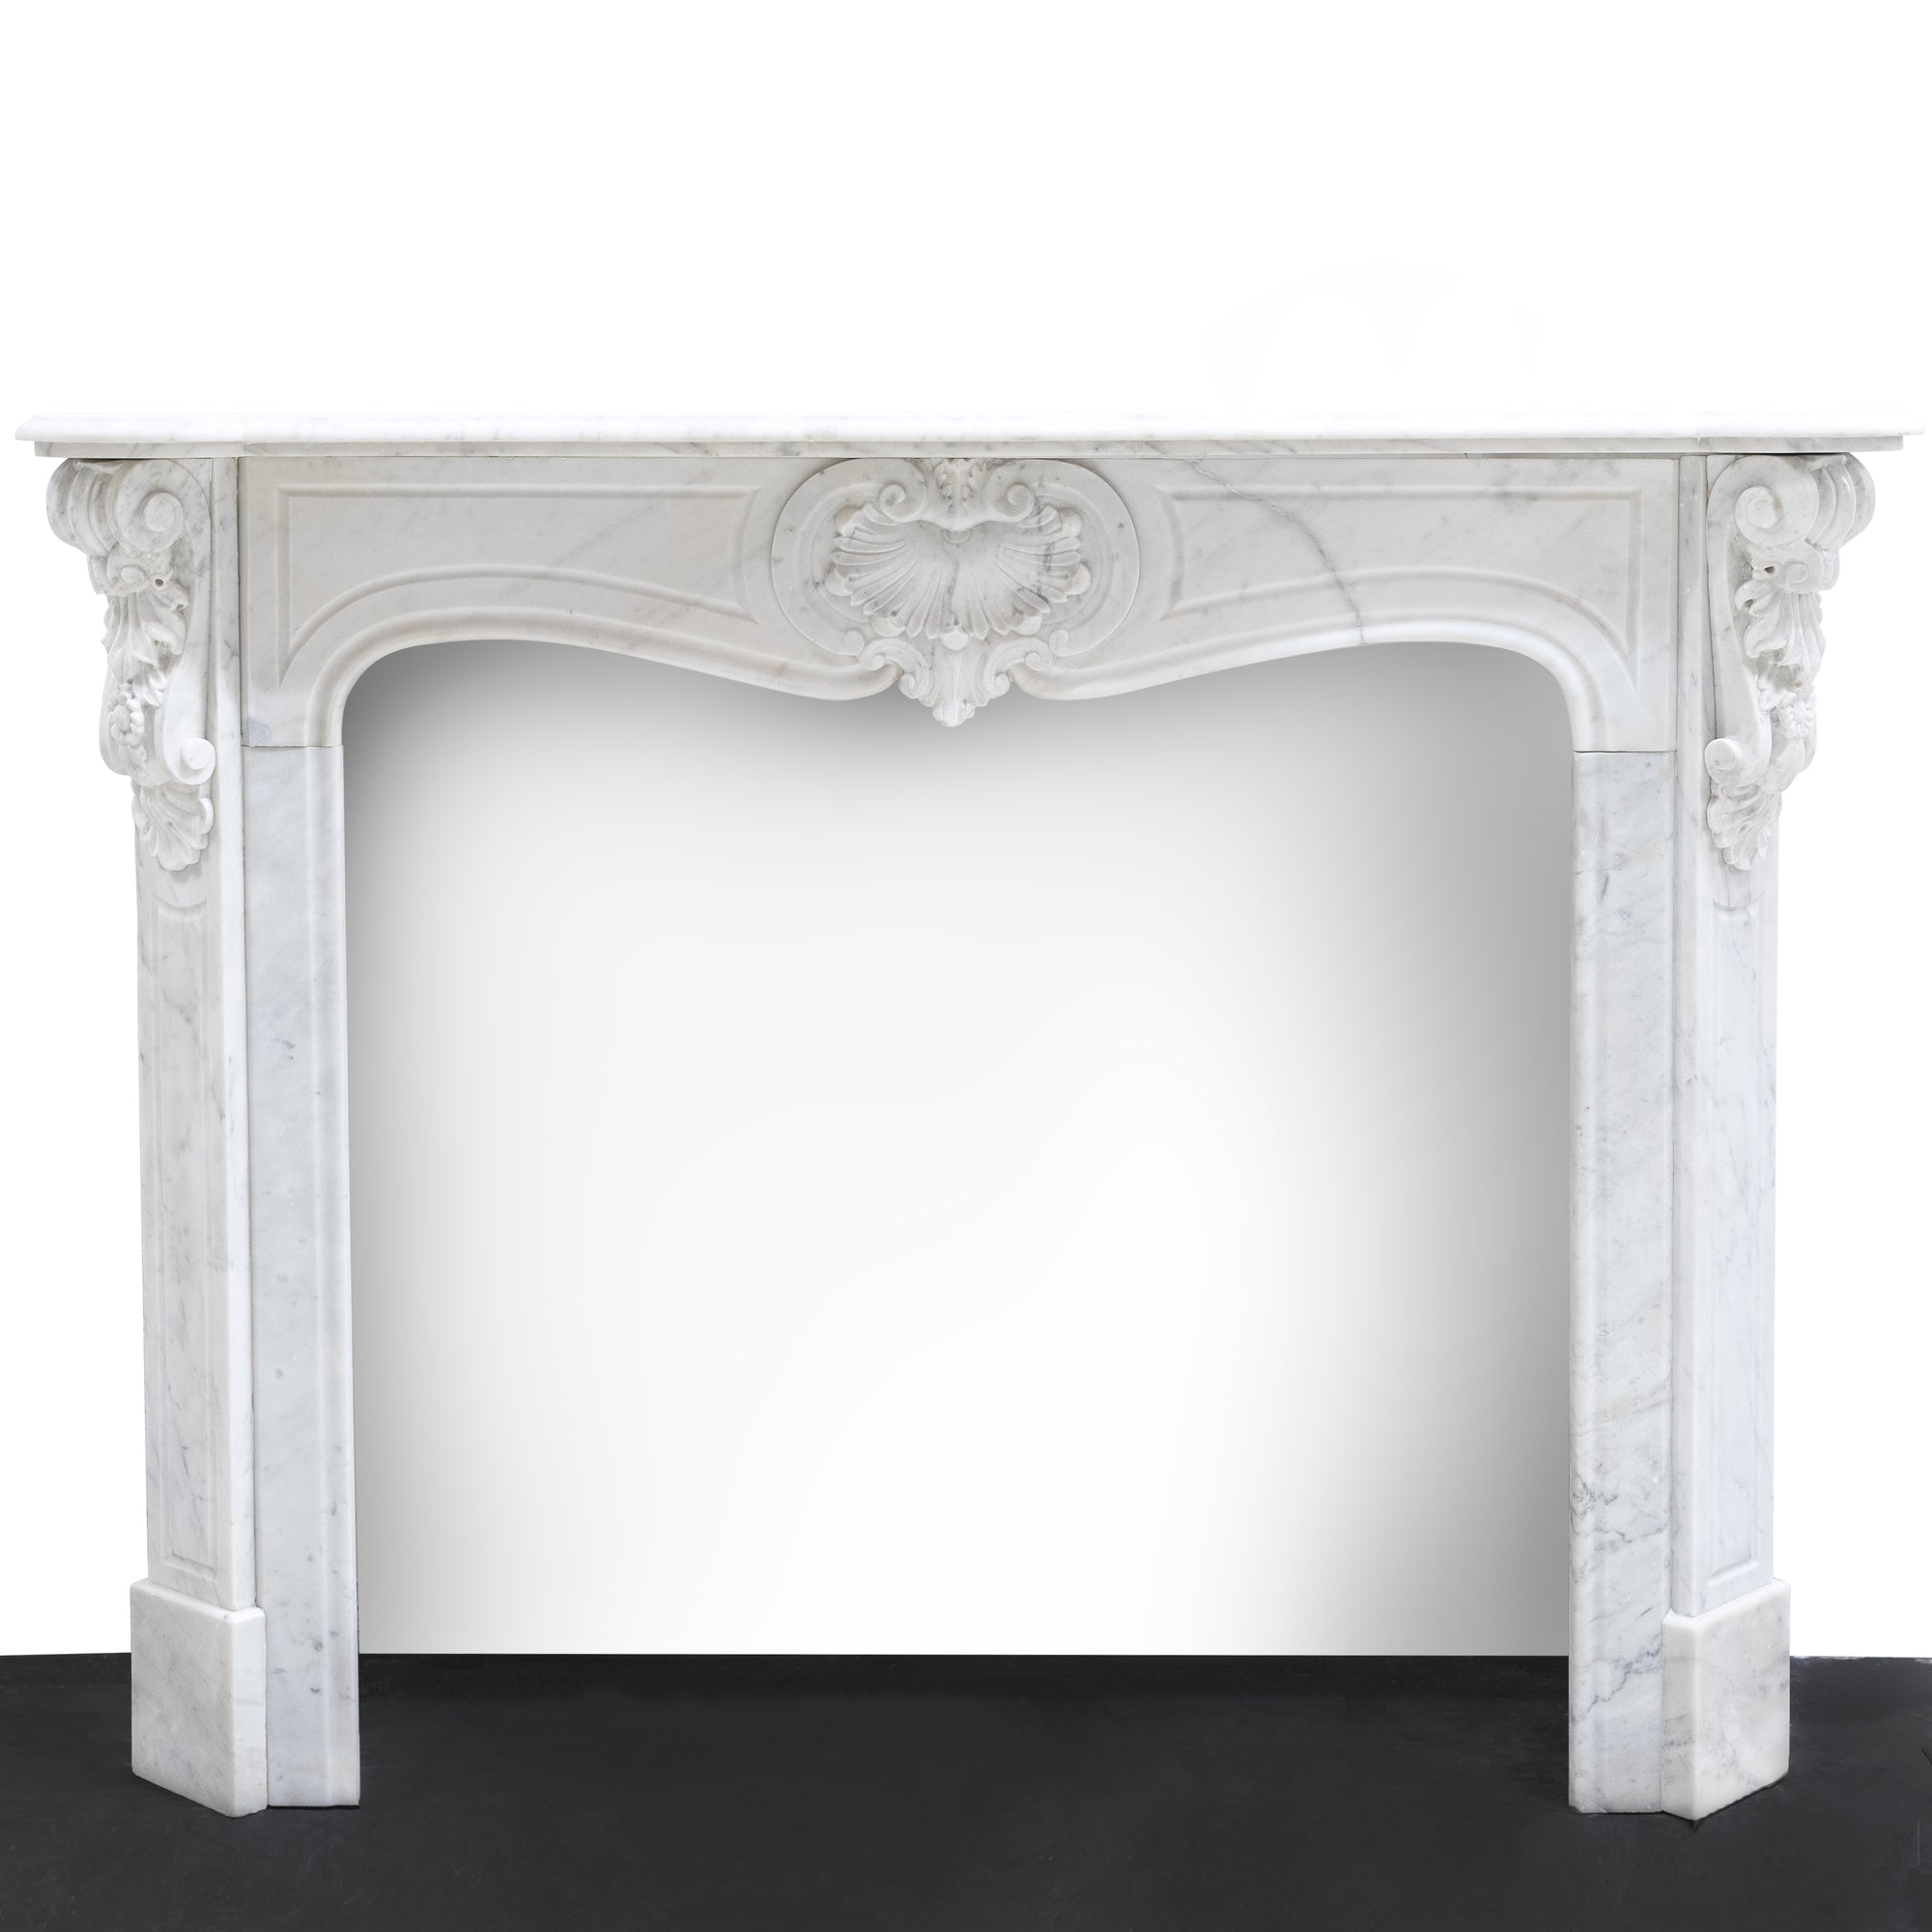 Antique Louis XV French Style Carrara Marble Fireplace | The Architectural Forum